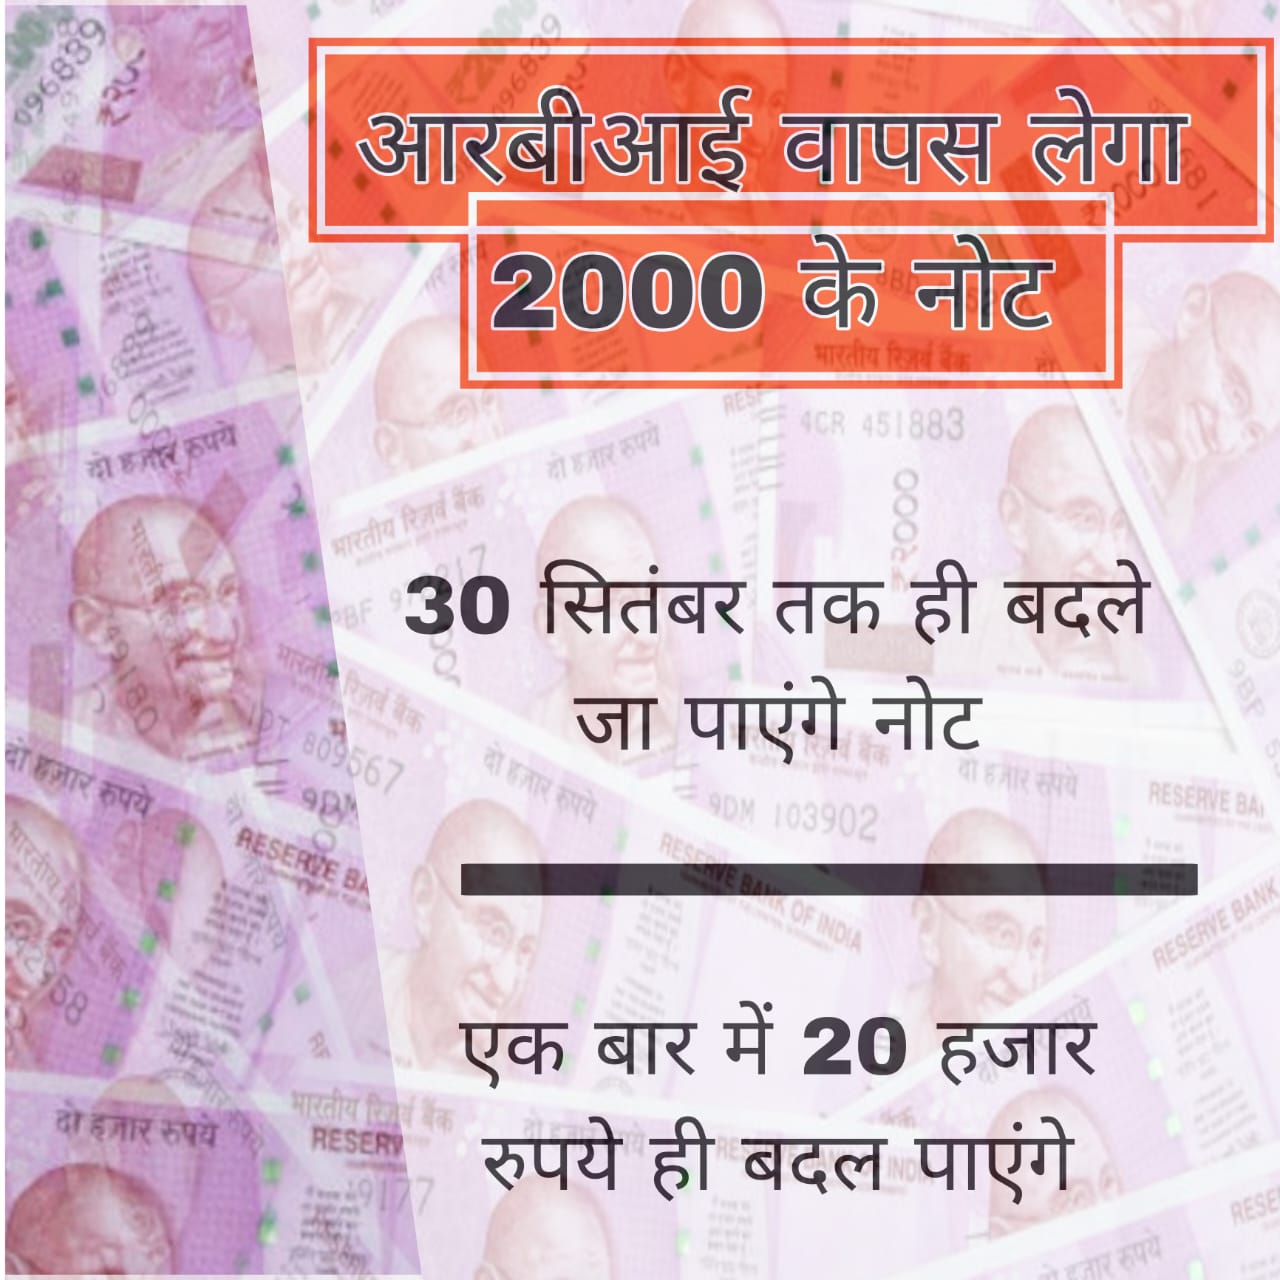 2000 note banned